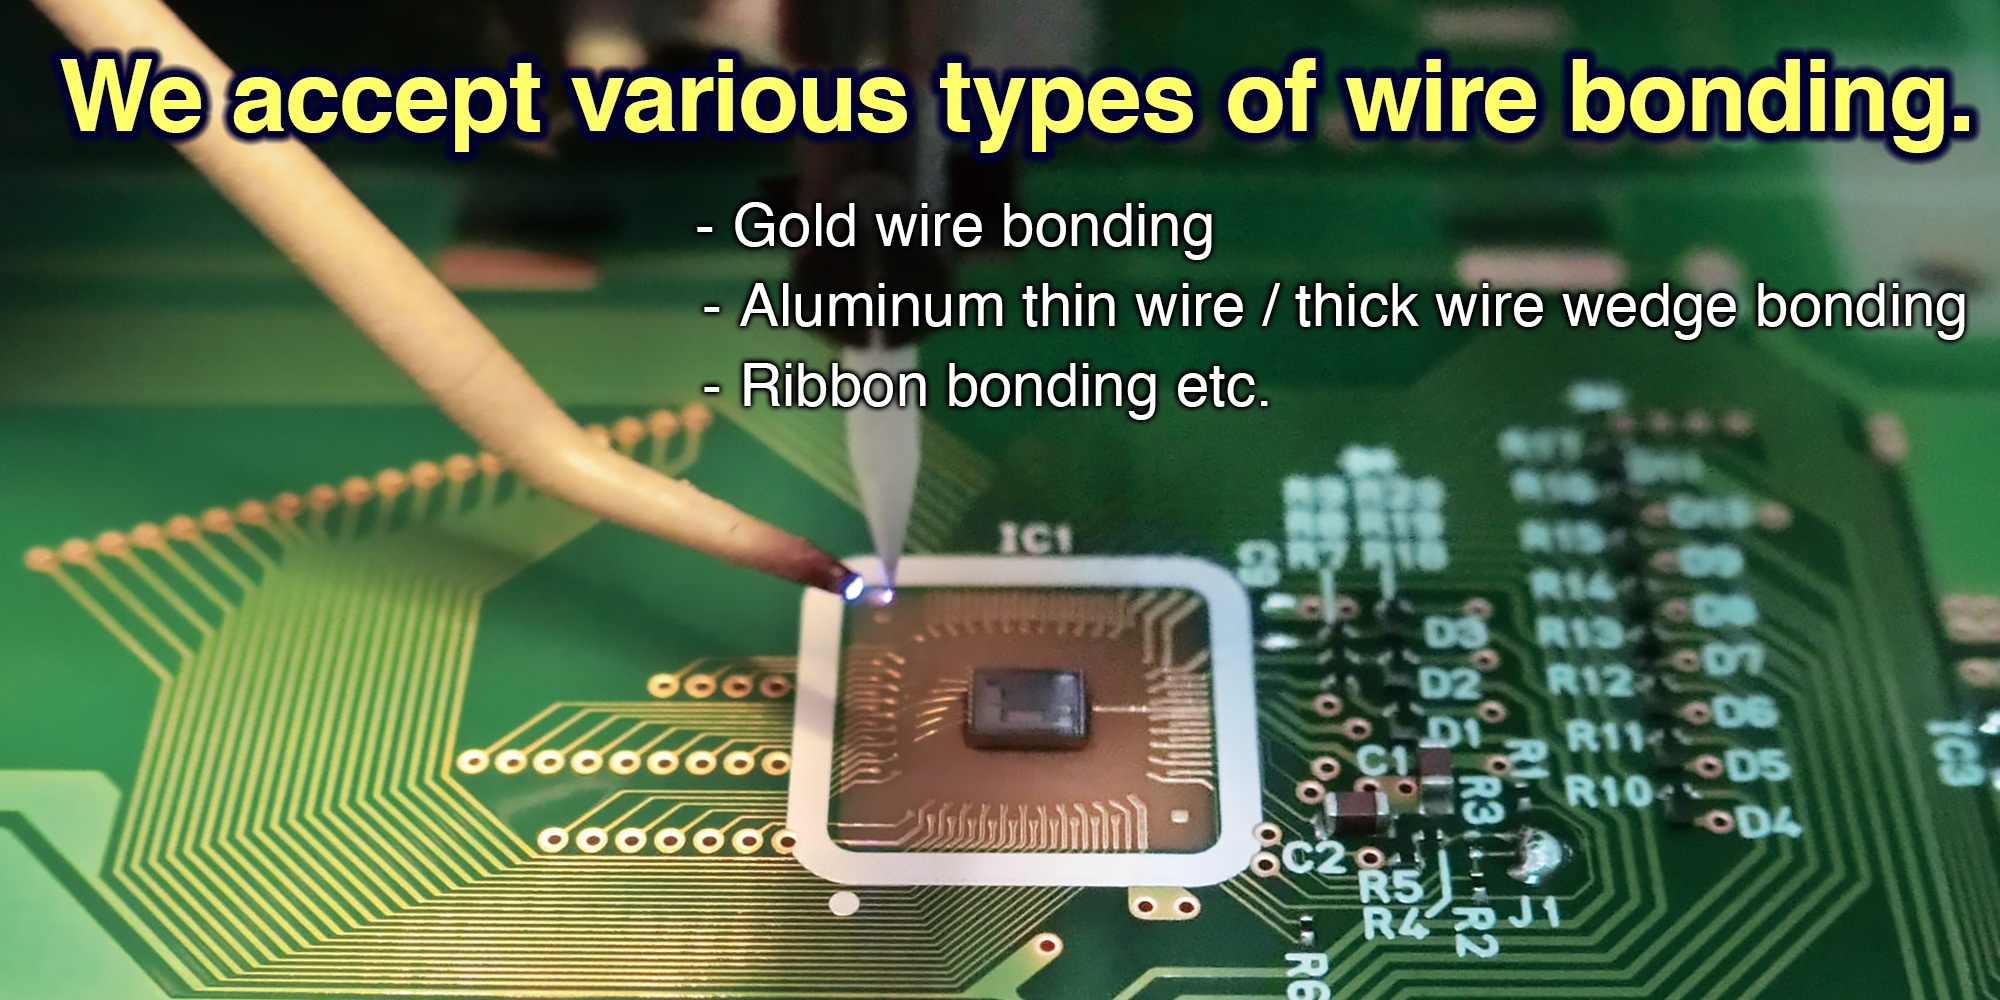 We accept various types of wire bonding